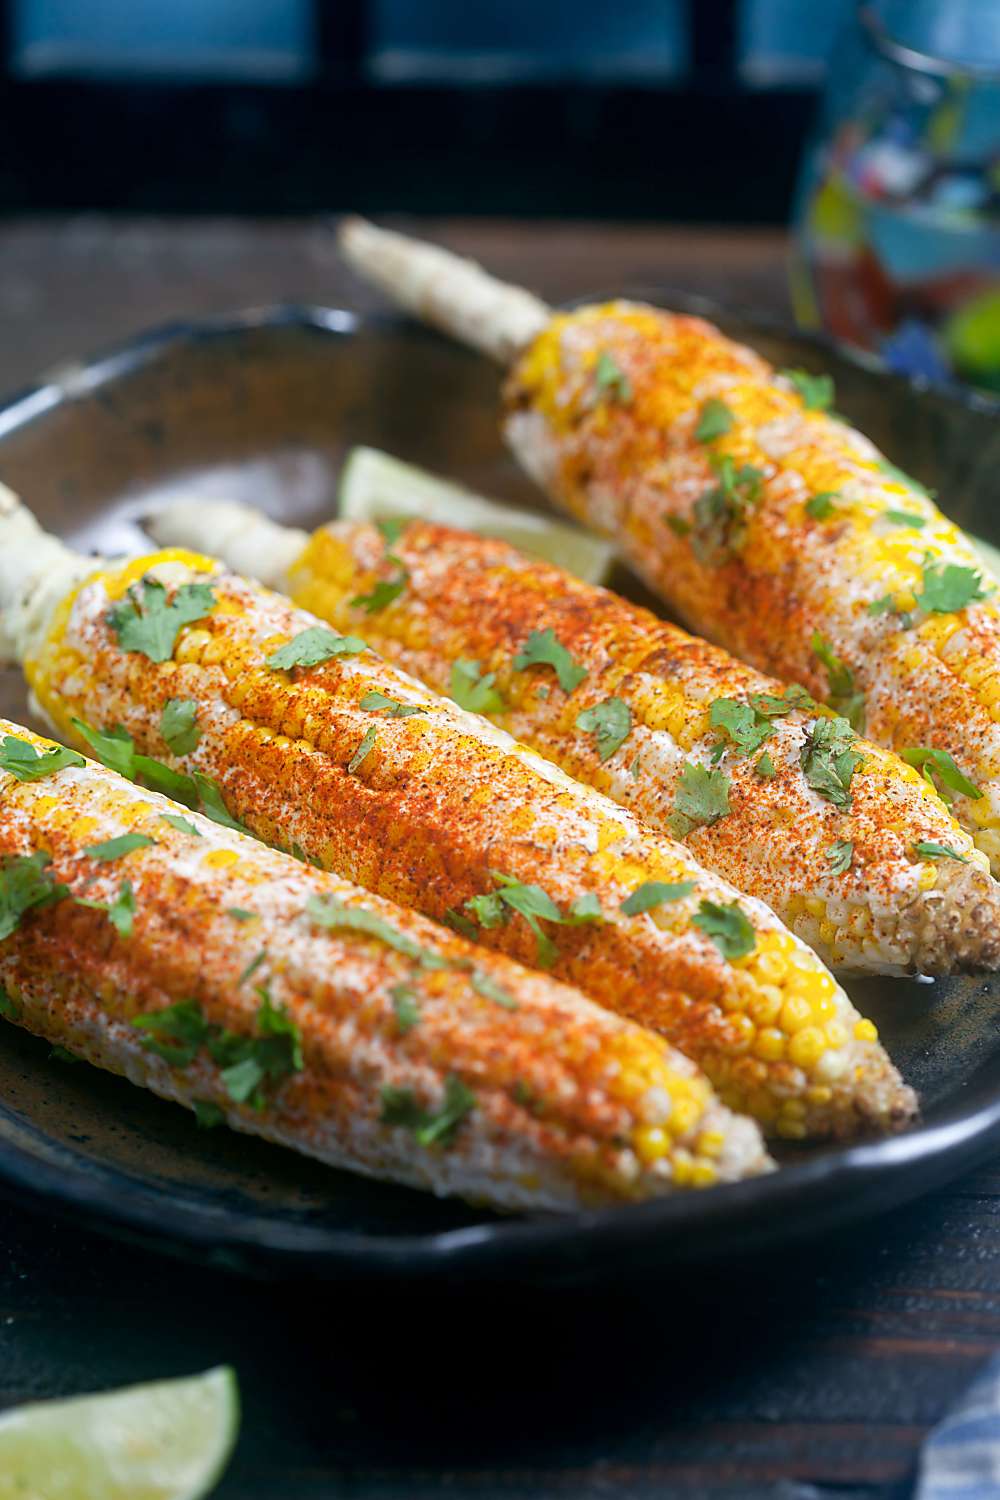 Grilled Corn on the Cob with Goat Cheese and Smoked Paprika